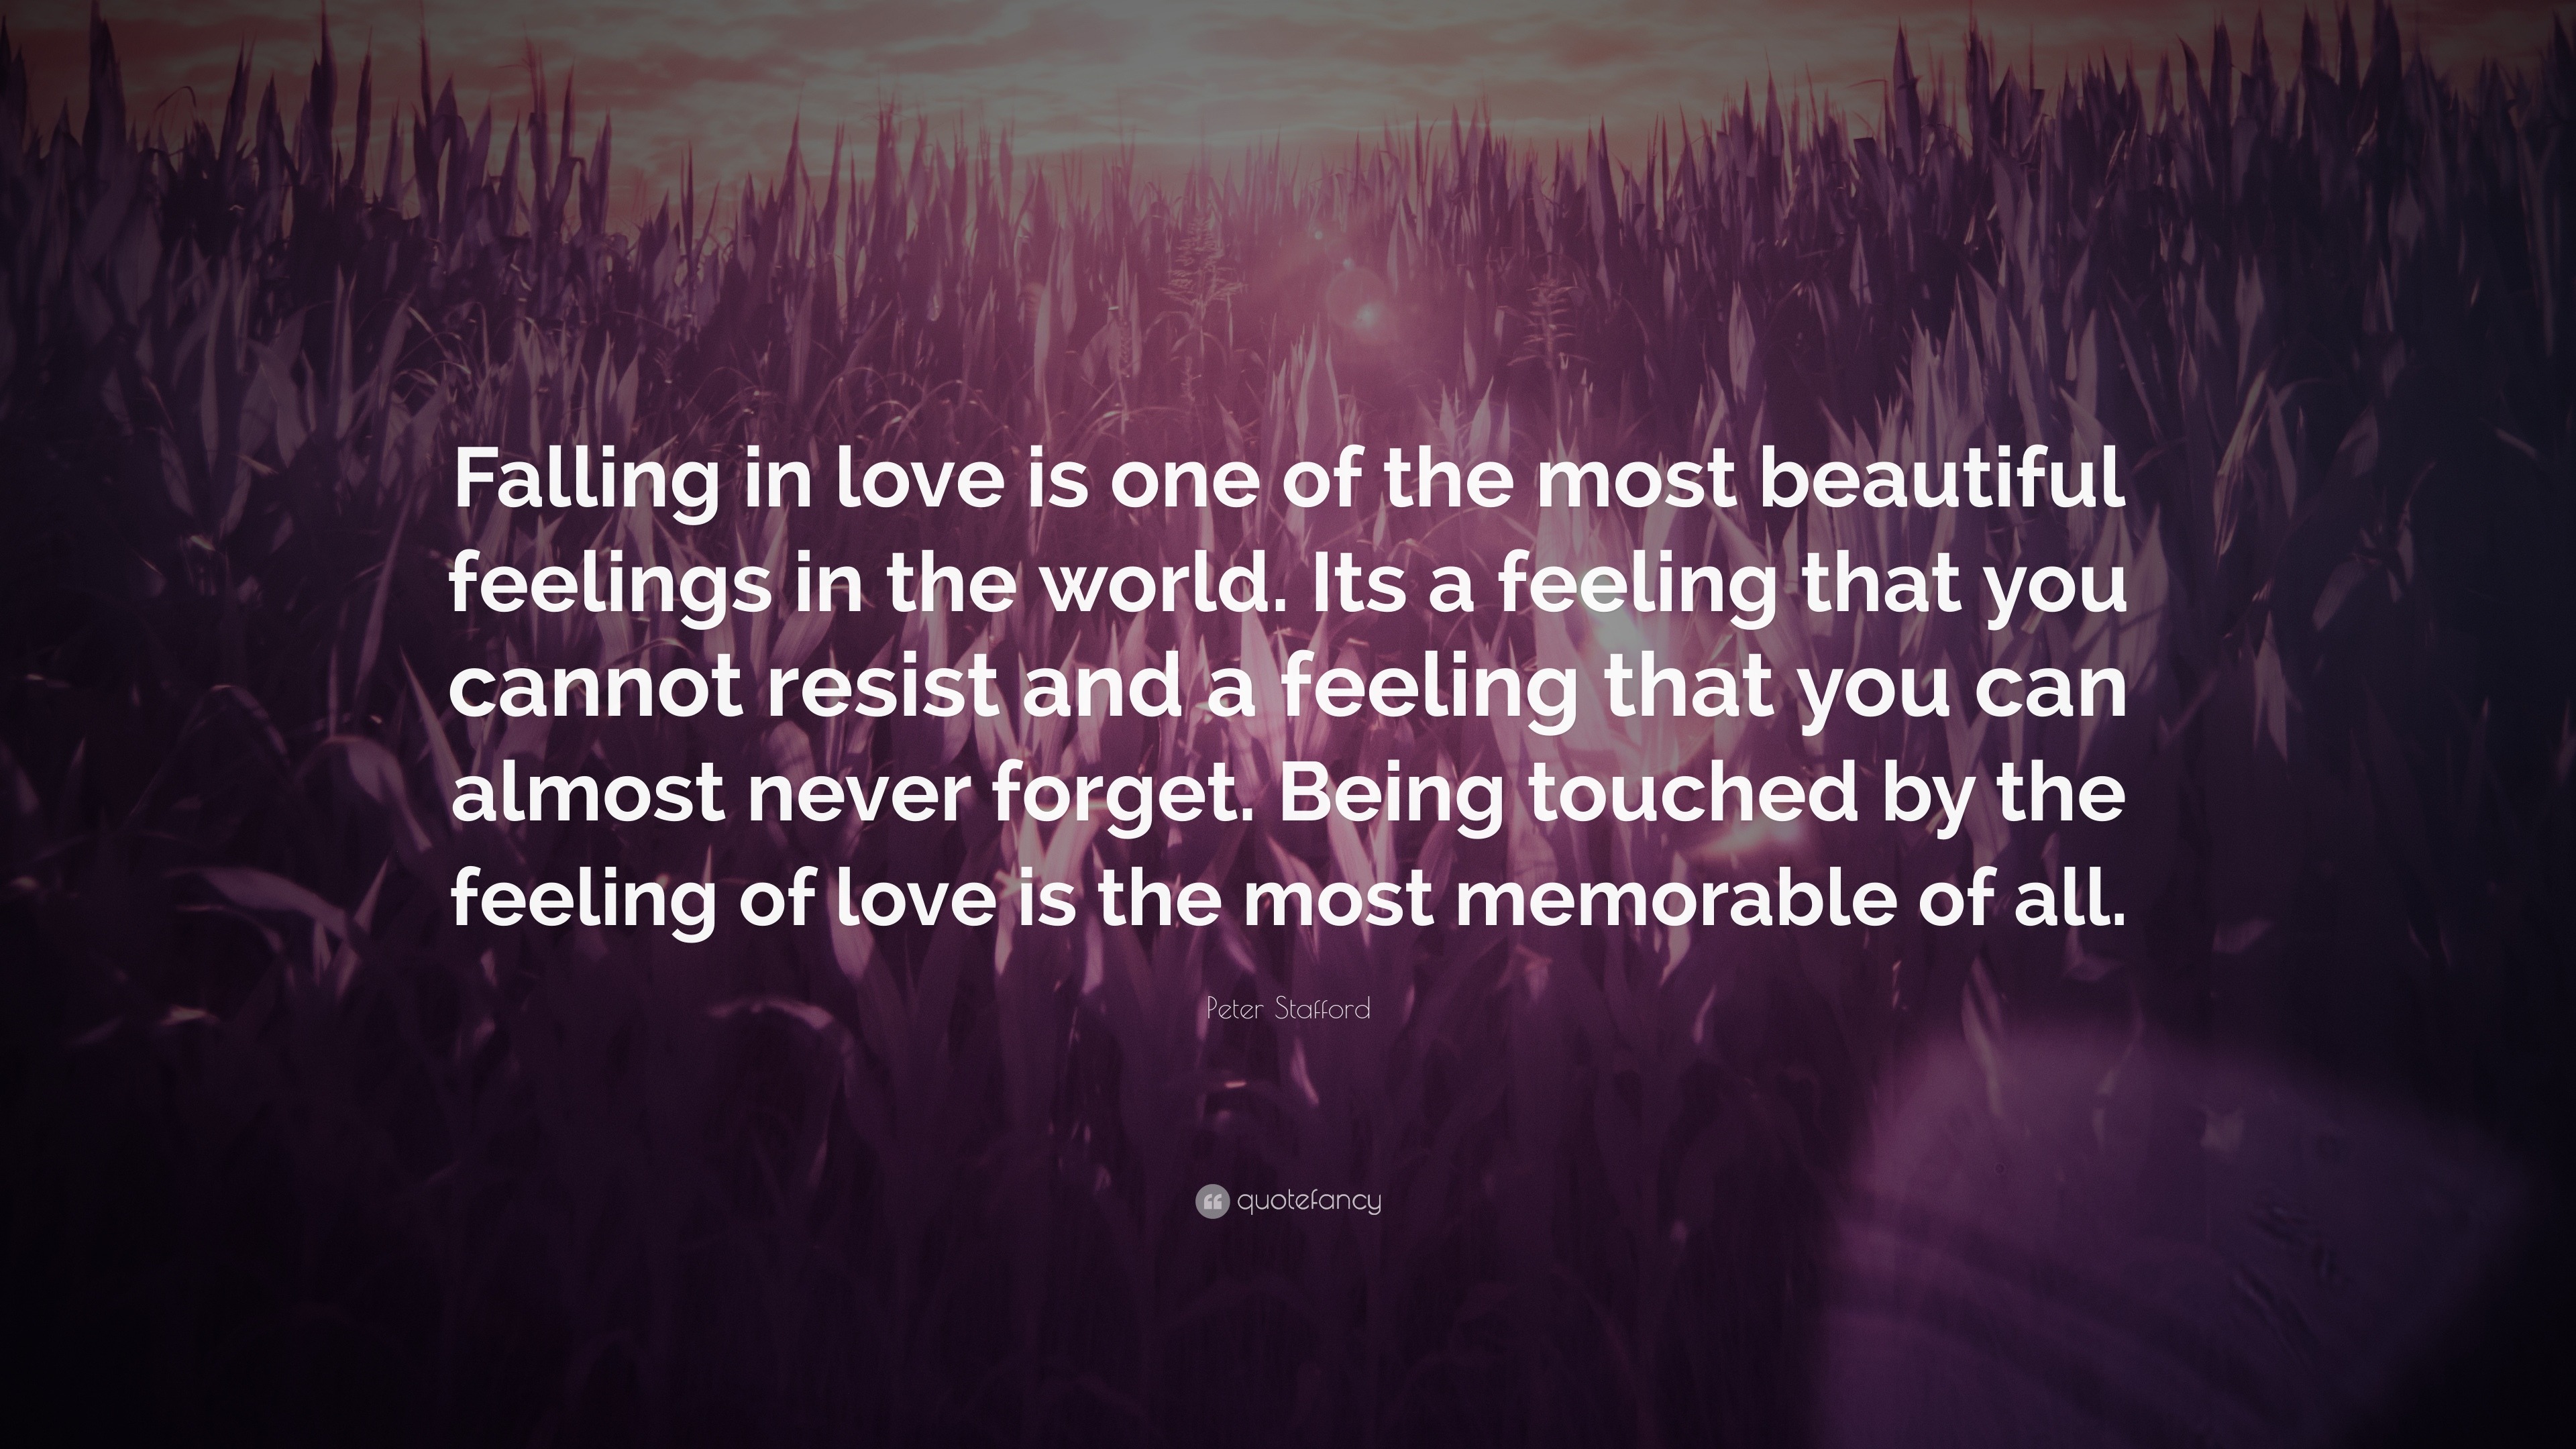 Peter Stafford Quote “Falling in love is one of the most beautiful feelings in